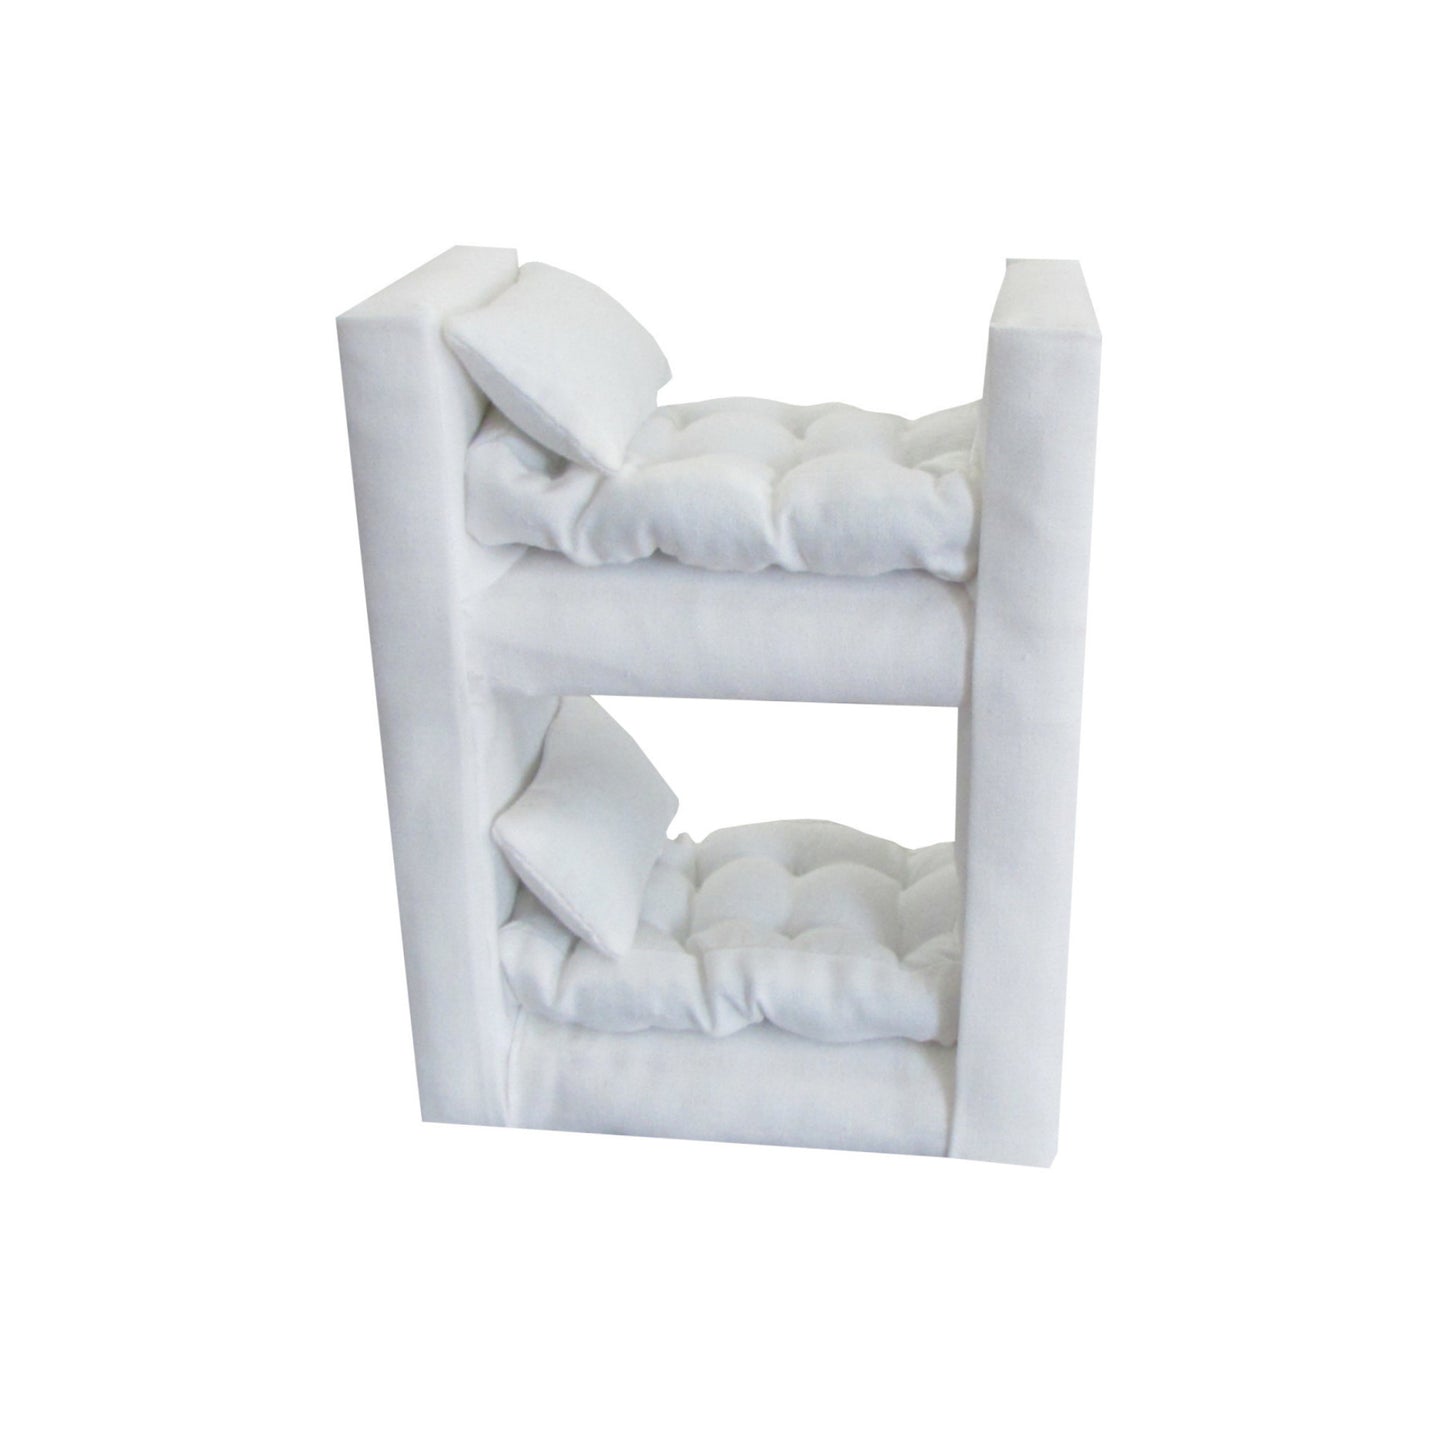 Upholstered White Doll Bunk BEd for 3-inch dolls